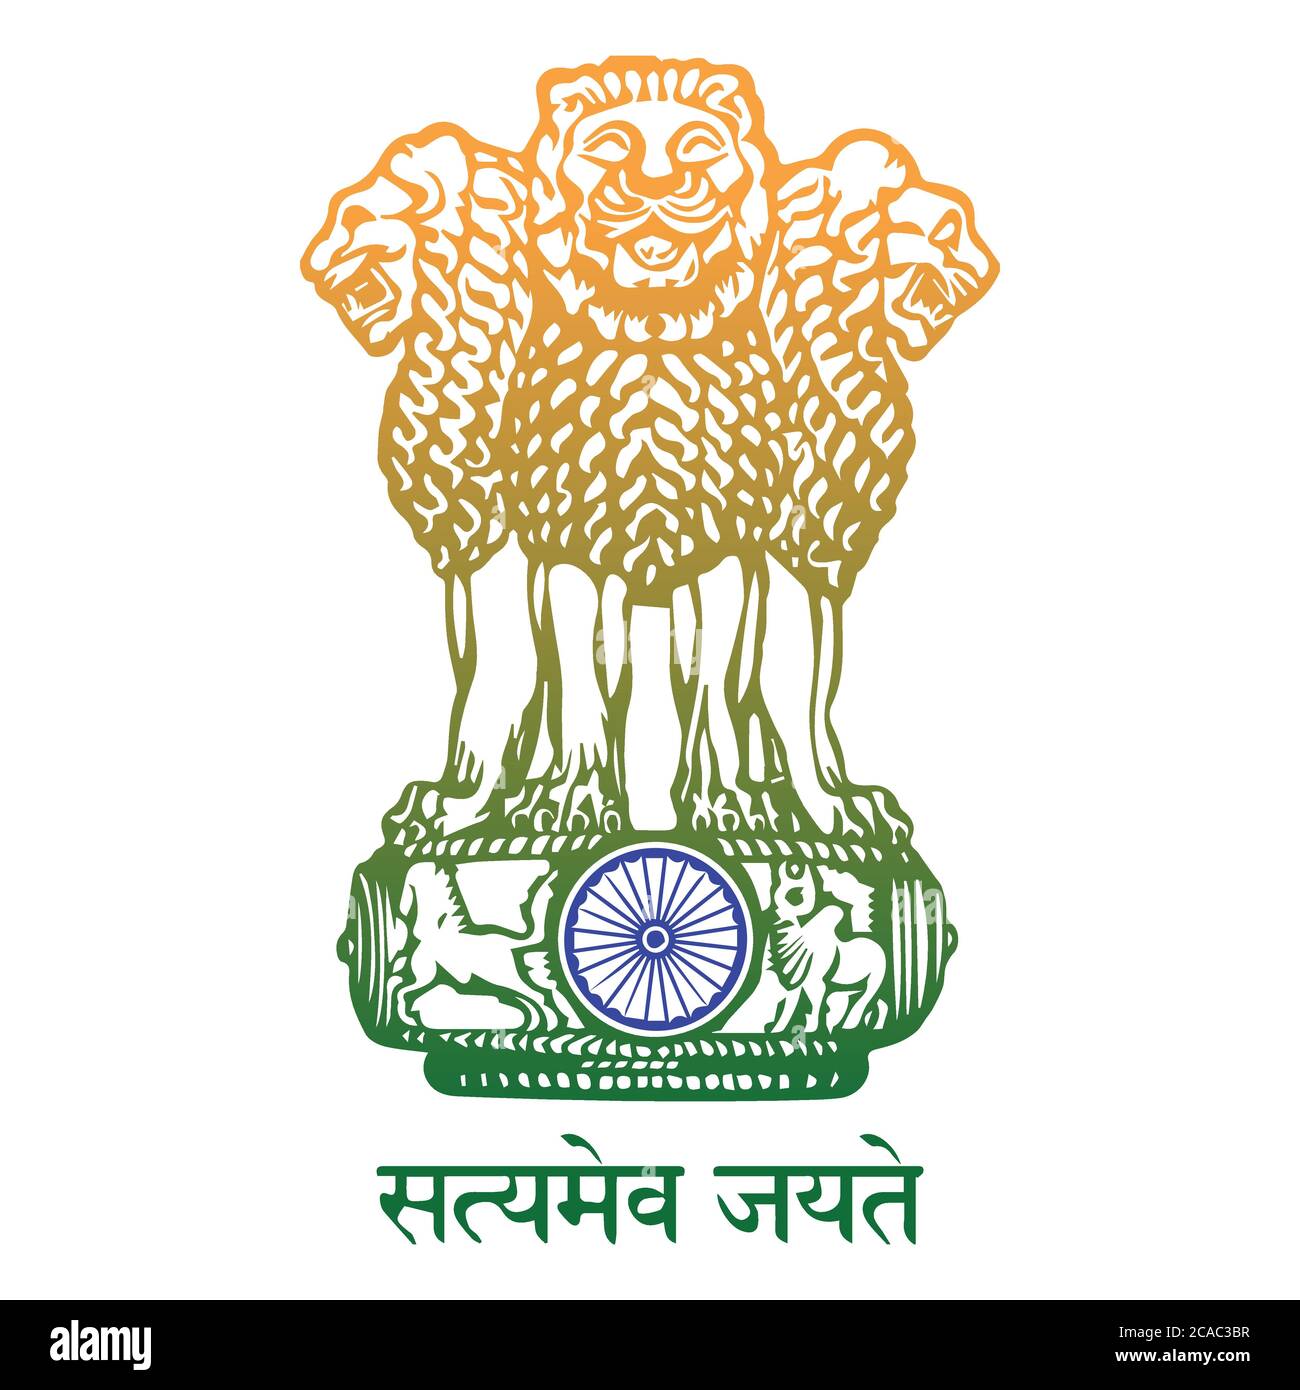 Vector Illustration Of National Symbols of India. with Indian flag ...